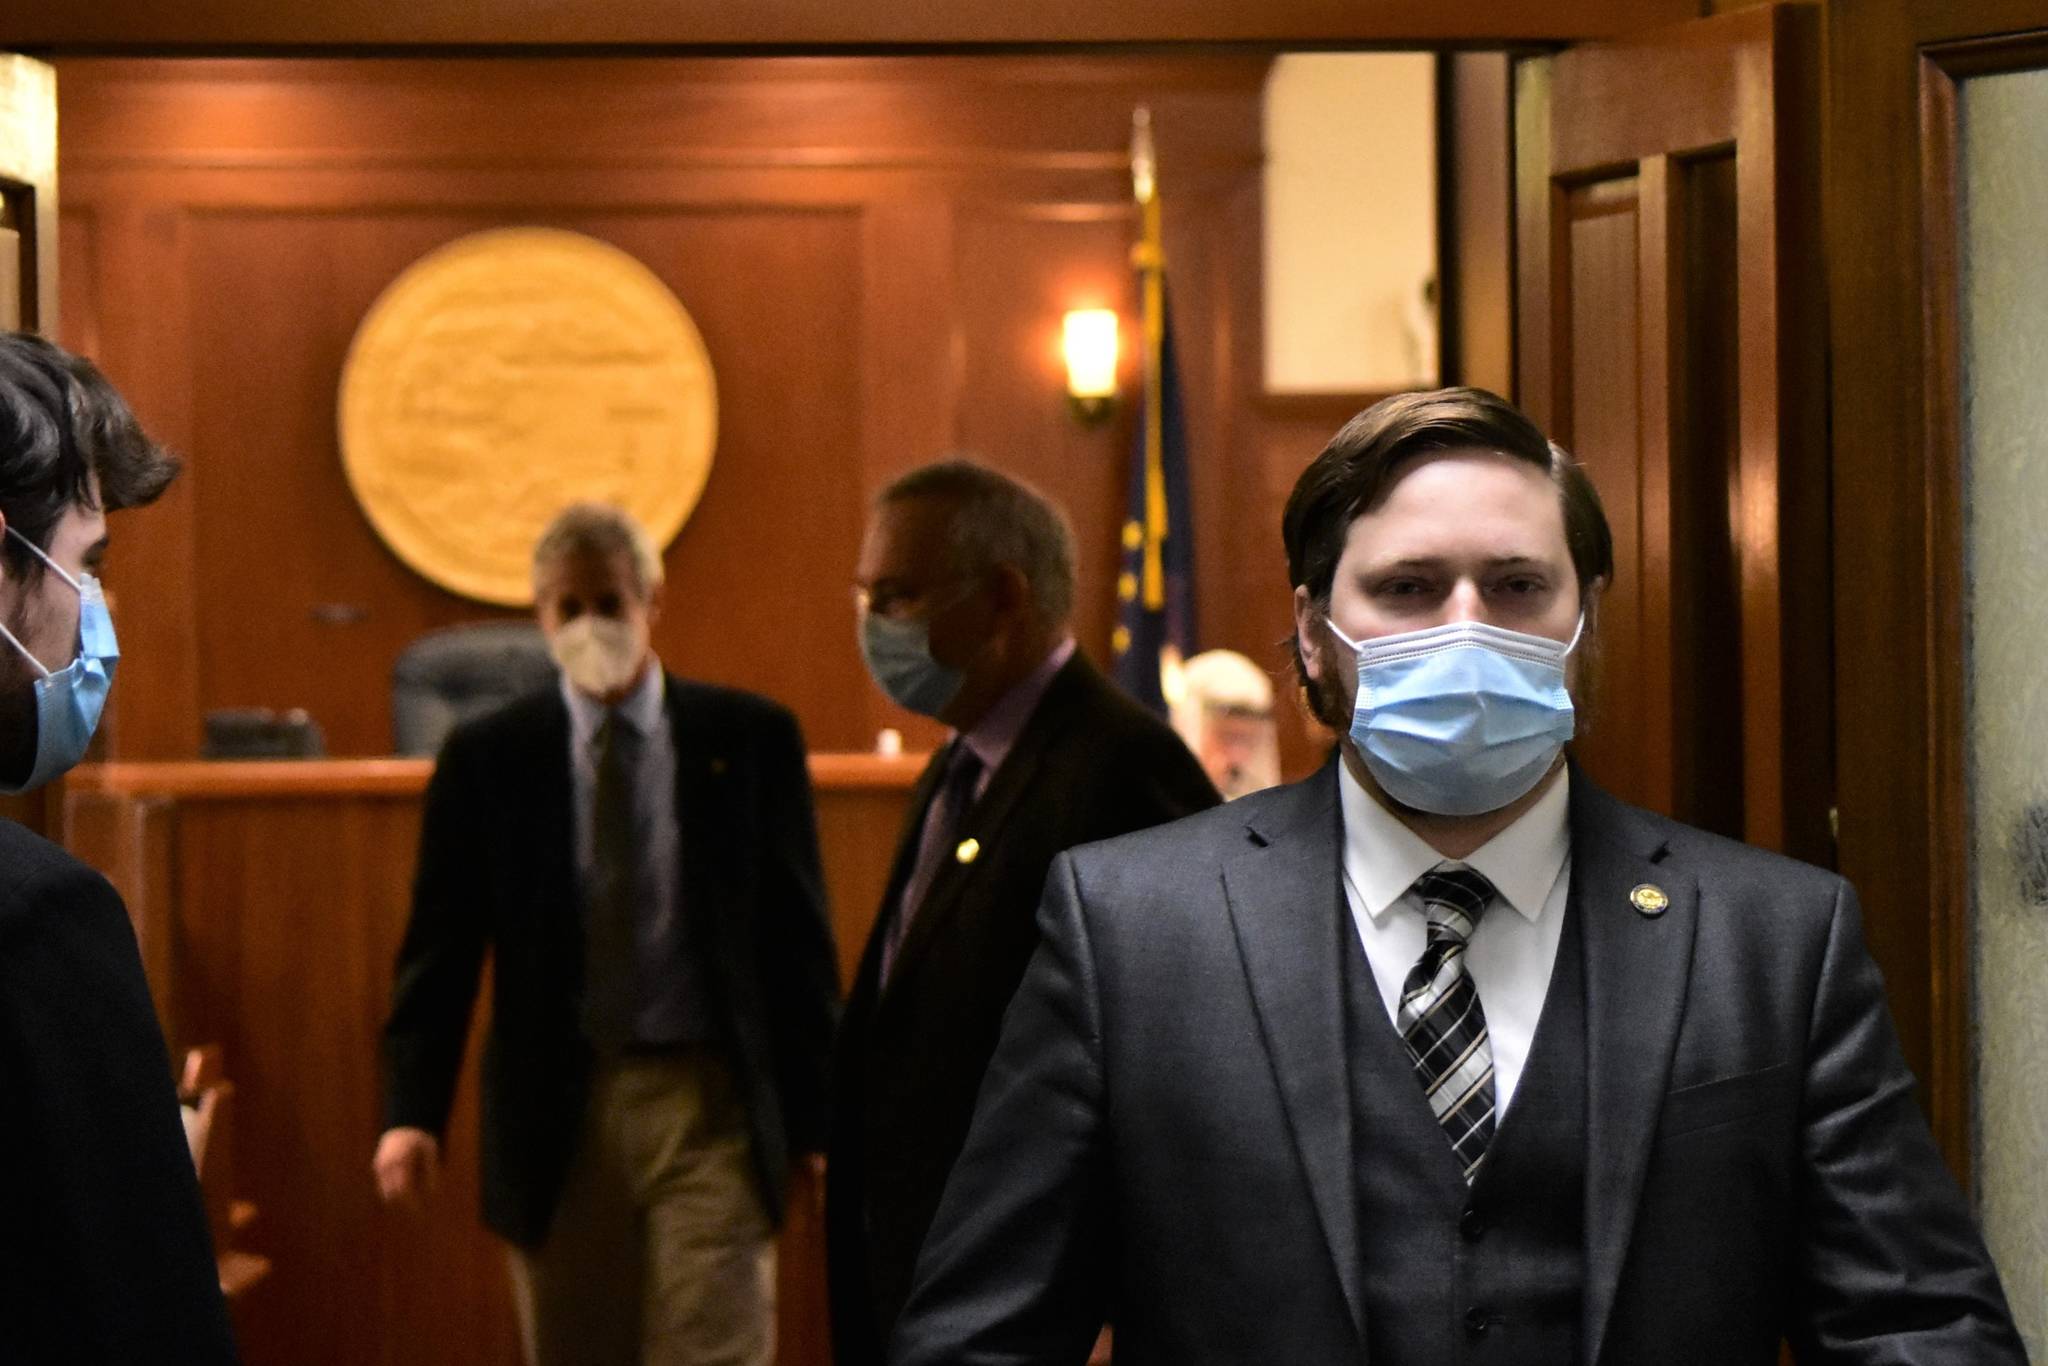 Rep. Christopher Kurka, R-Wasilla, seen here leaving the House chambers on Feb. 22, questioned masking rules on the floor of the House Monday and said there was political bias behind enforcement of rules. However, also on Monday two staff members tested positive for COVID-19 and 14 other people, including two House lawmakers, have gone into quarantine. (Peter Segall / Juneau Empire)